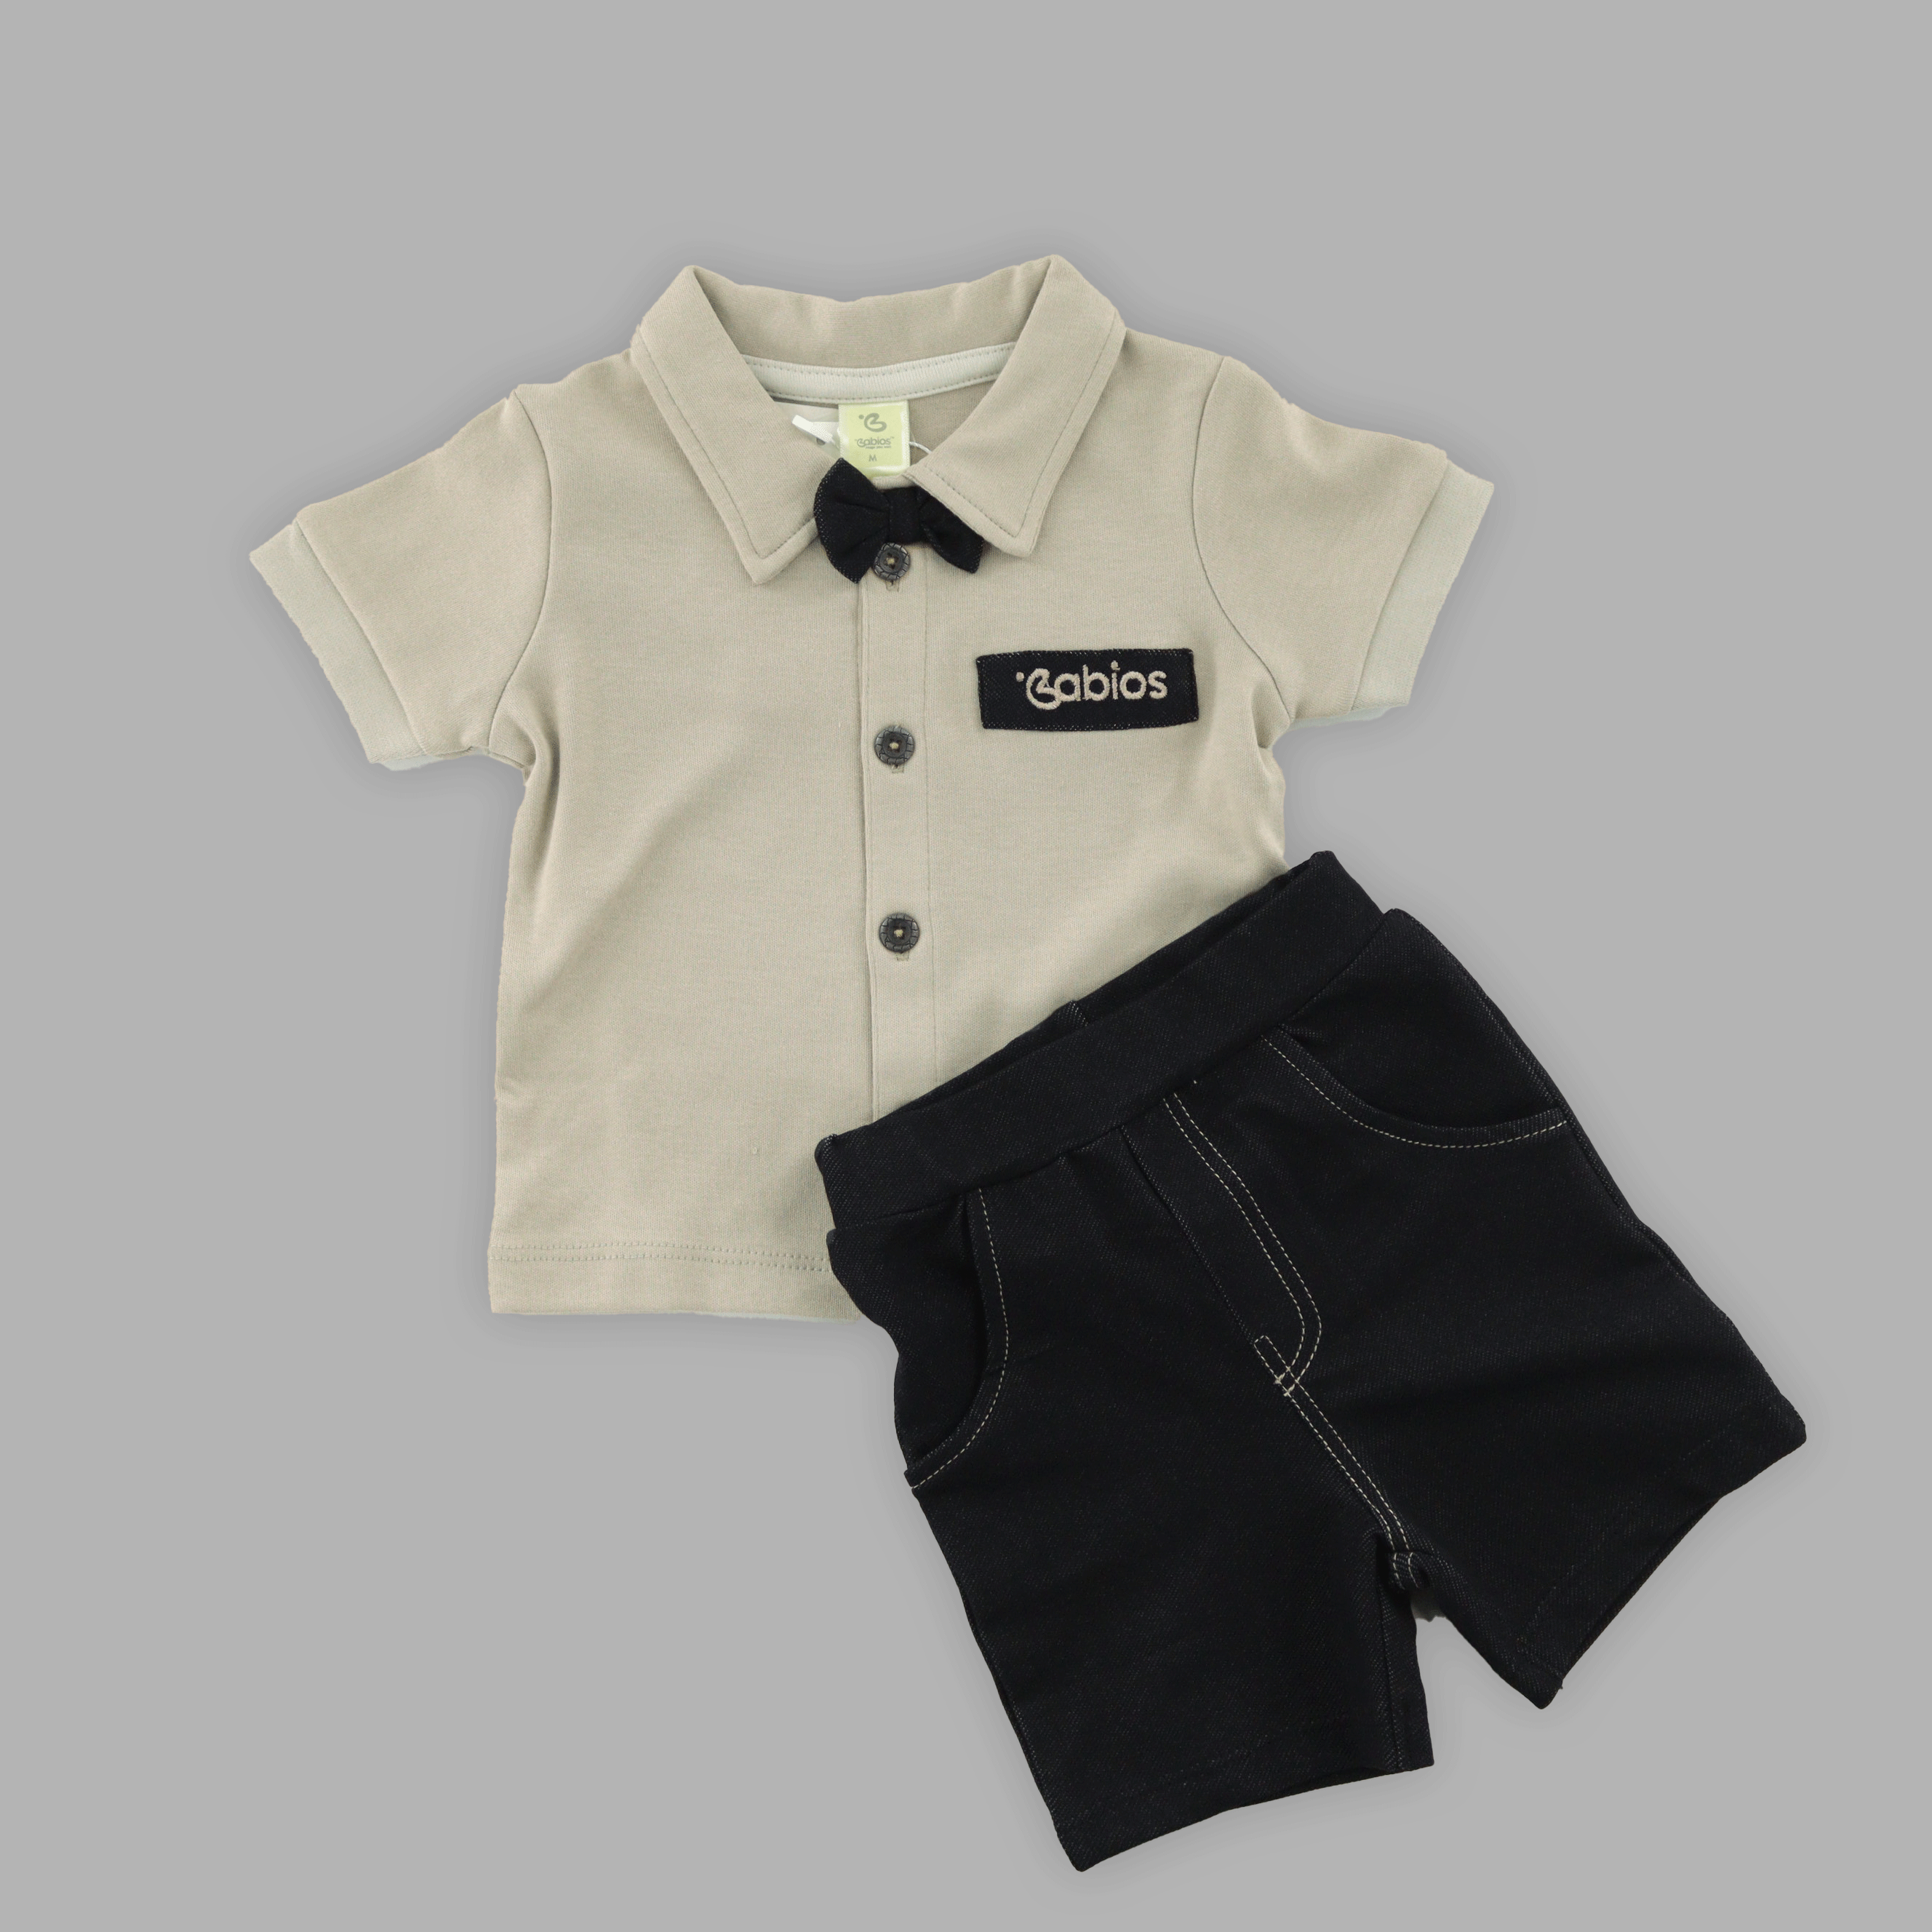 Half T-shirt and Shorts Set for Baby Boys 100% pure cotton